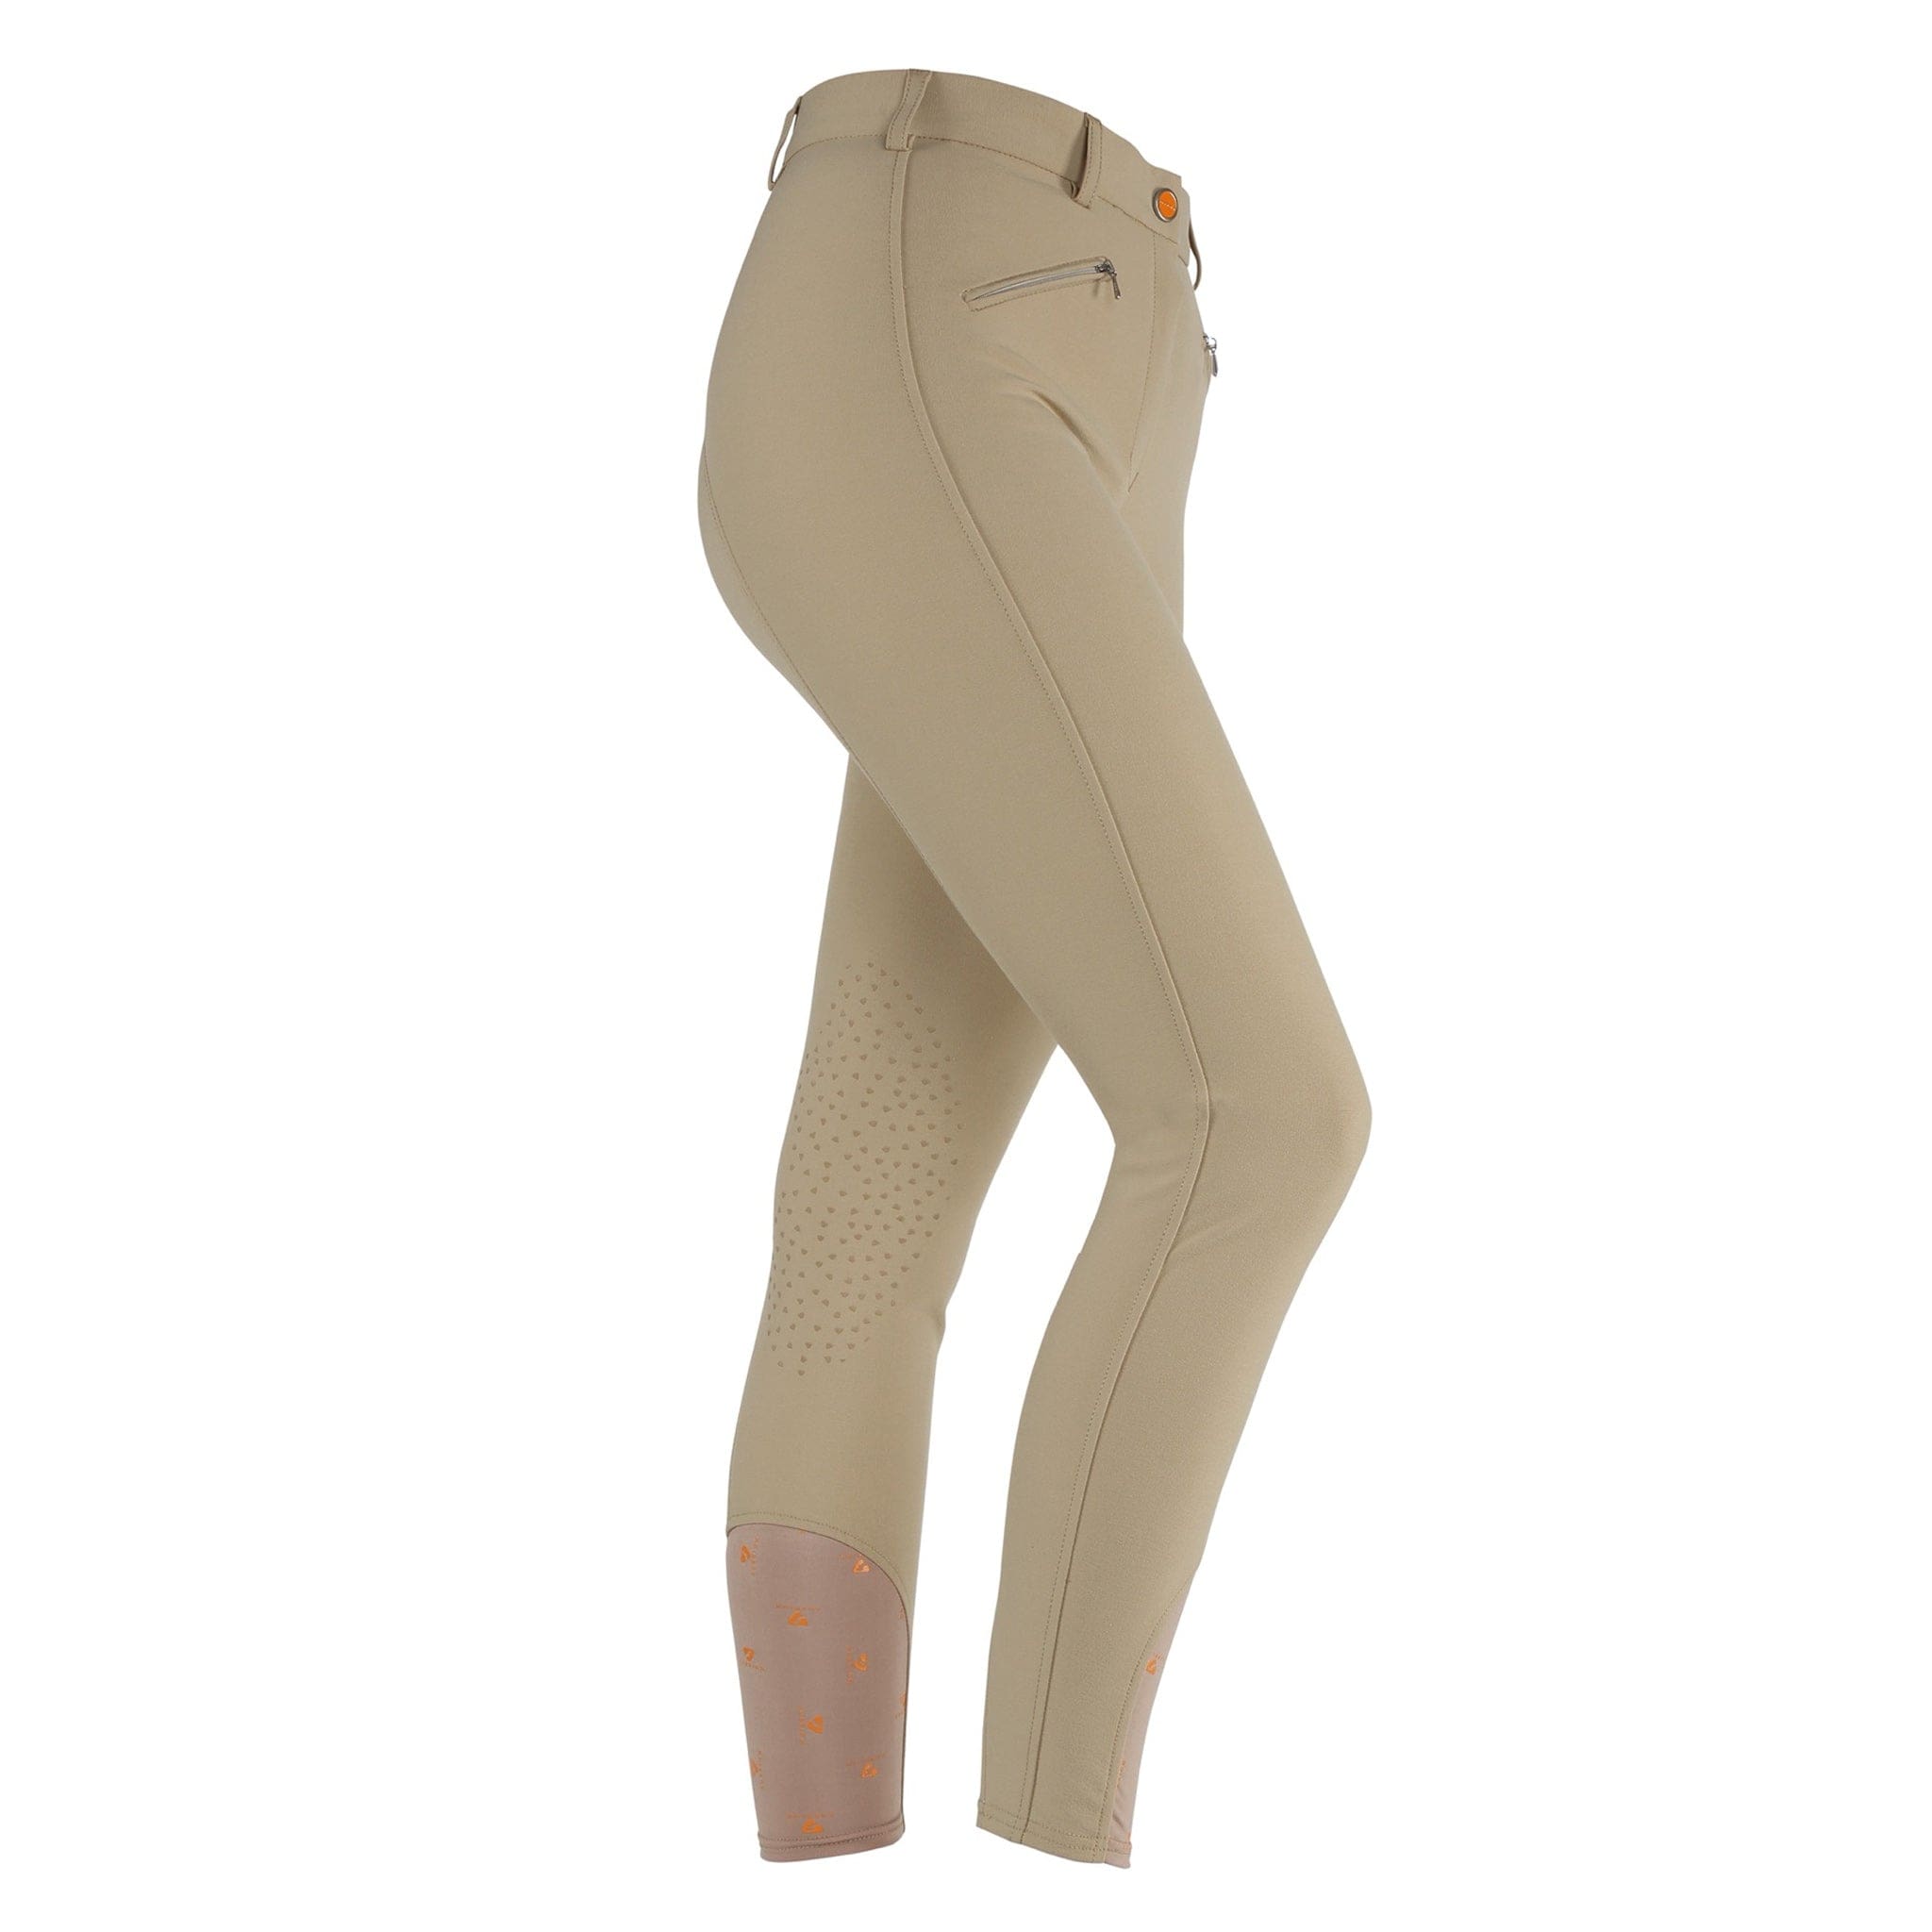 Shires Aubrion Children's Thompson Silicone Knee Patch Breeches 8142 Beige Side